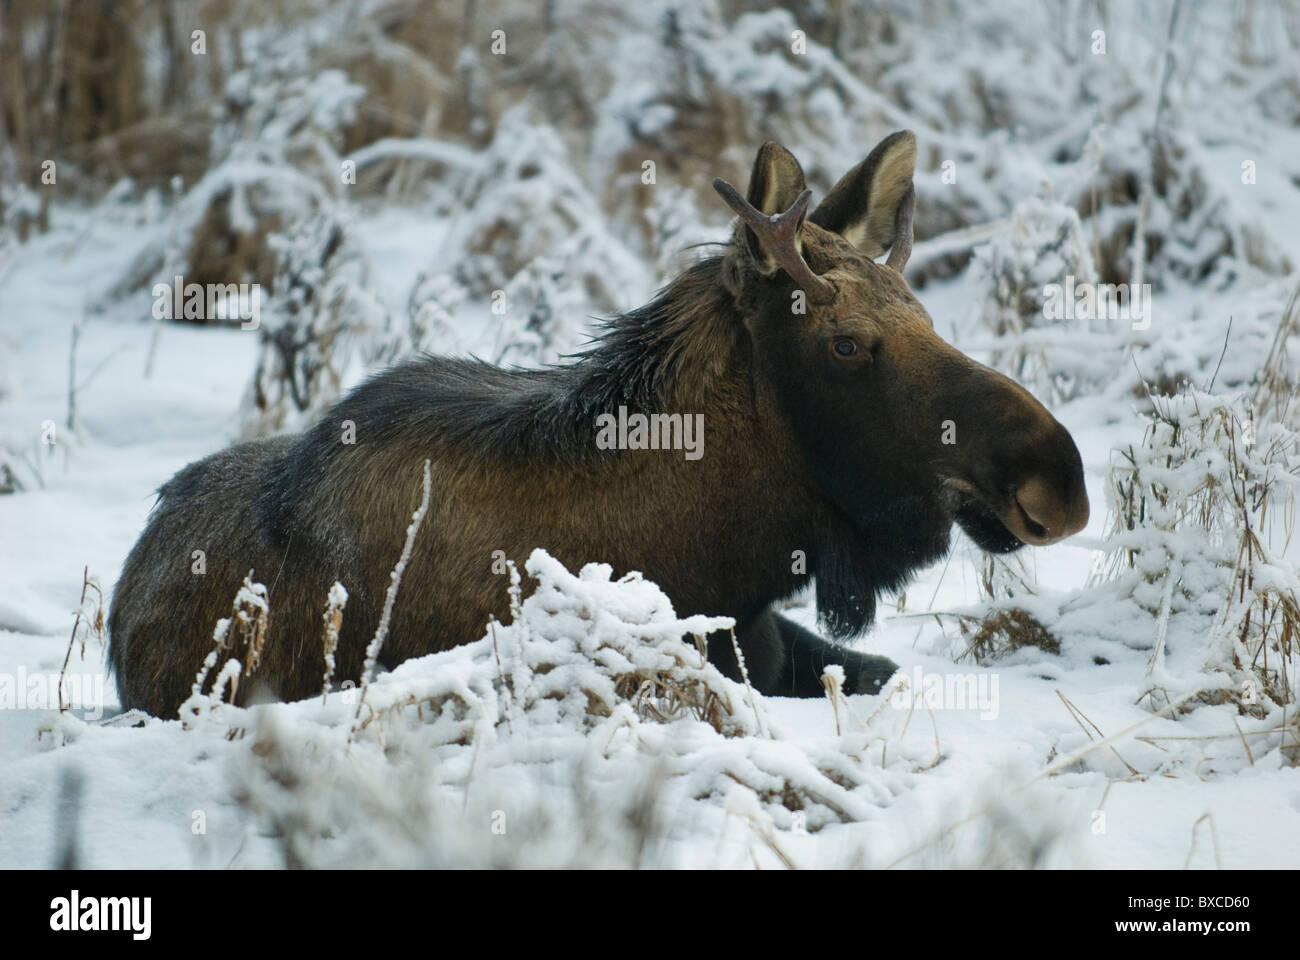 A moose rest in the snow near Anchorage, Alaska. Stock Photo